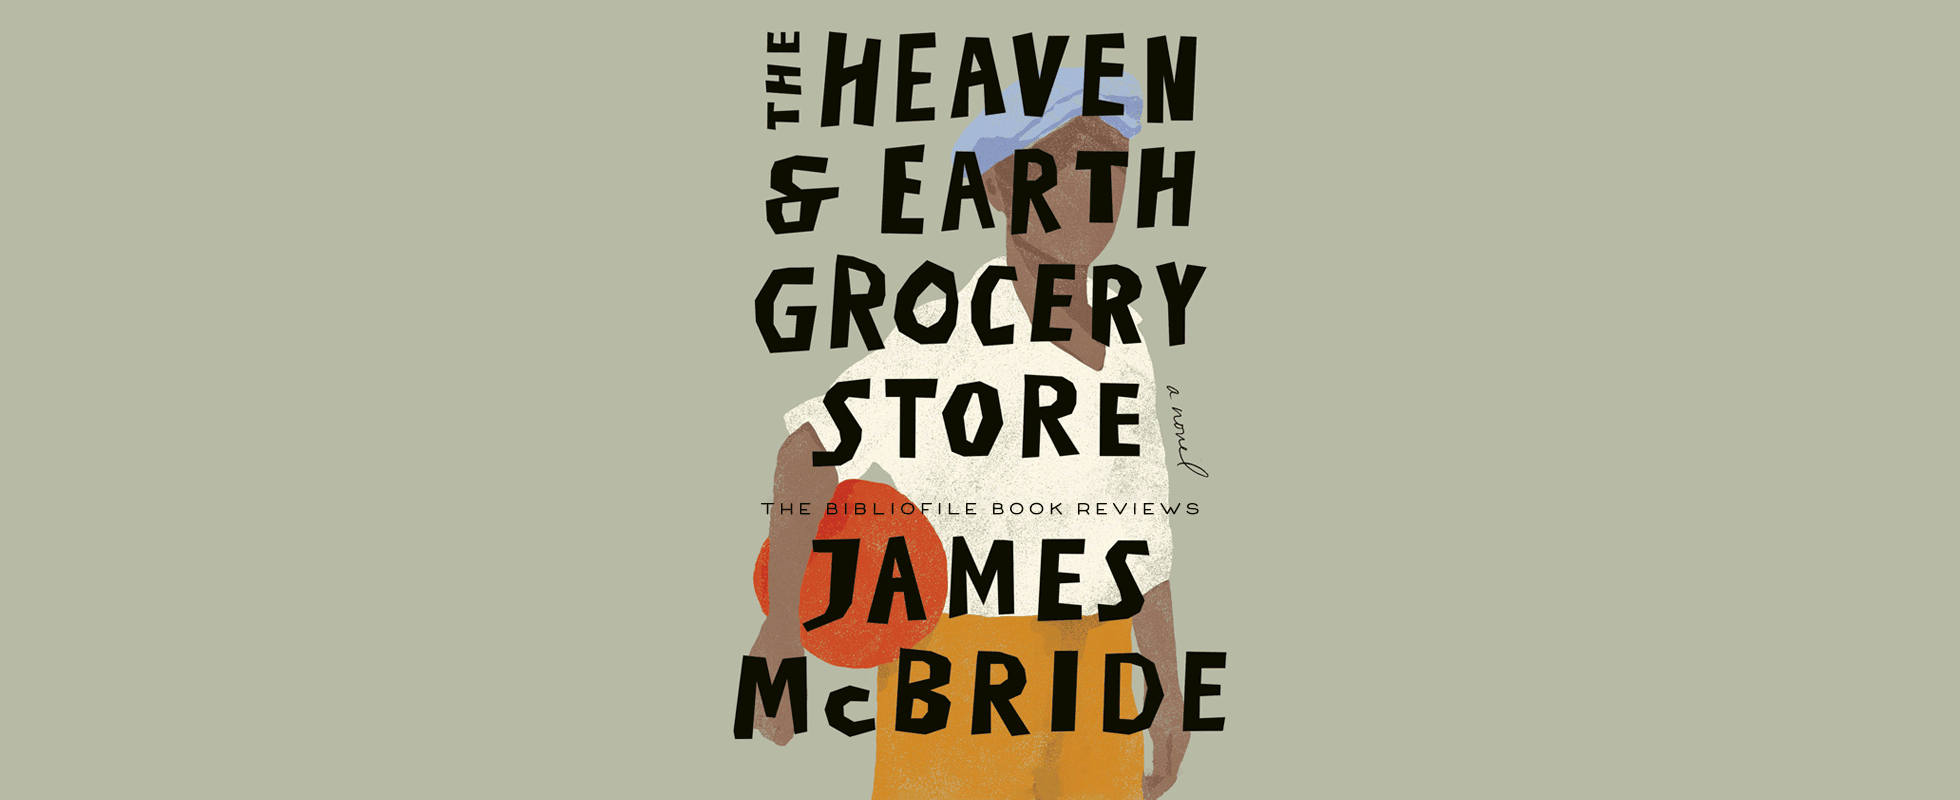 the heaven & Earth grocery store by james mcbride book review plot summary synopsis recap discussion analysis